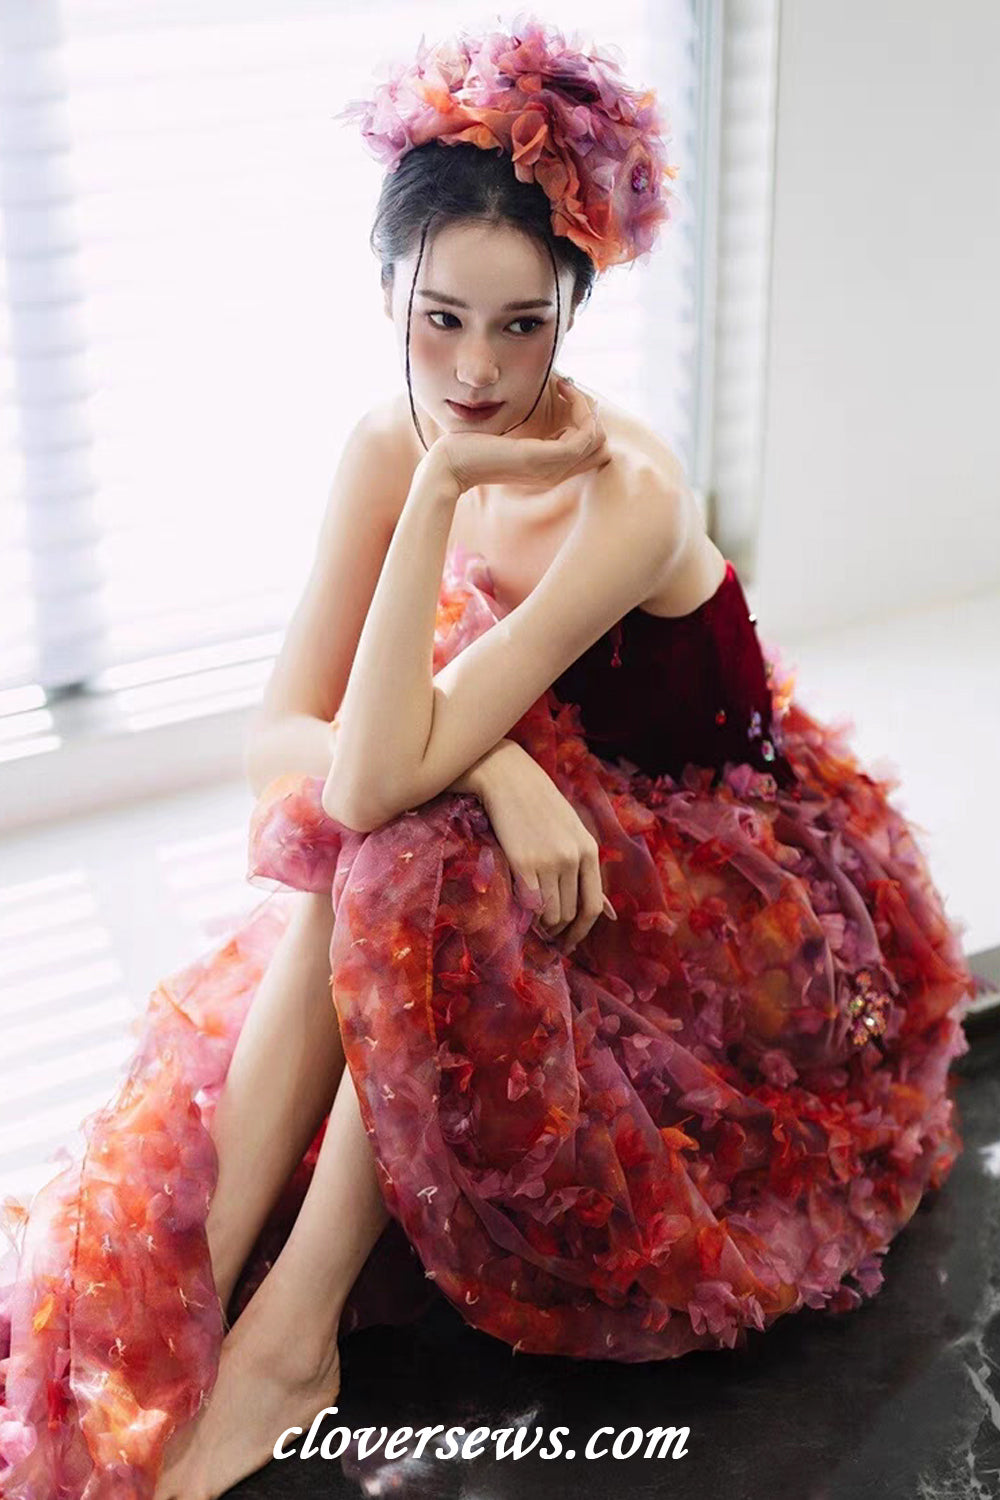 Strapless Gradient Red 3D Flowers Sequined Bud With Slit Spring Dresses, CP1136